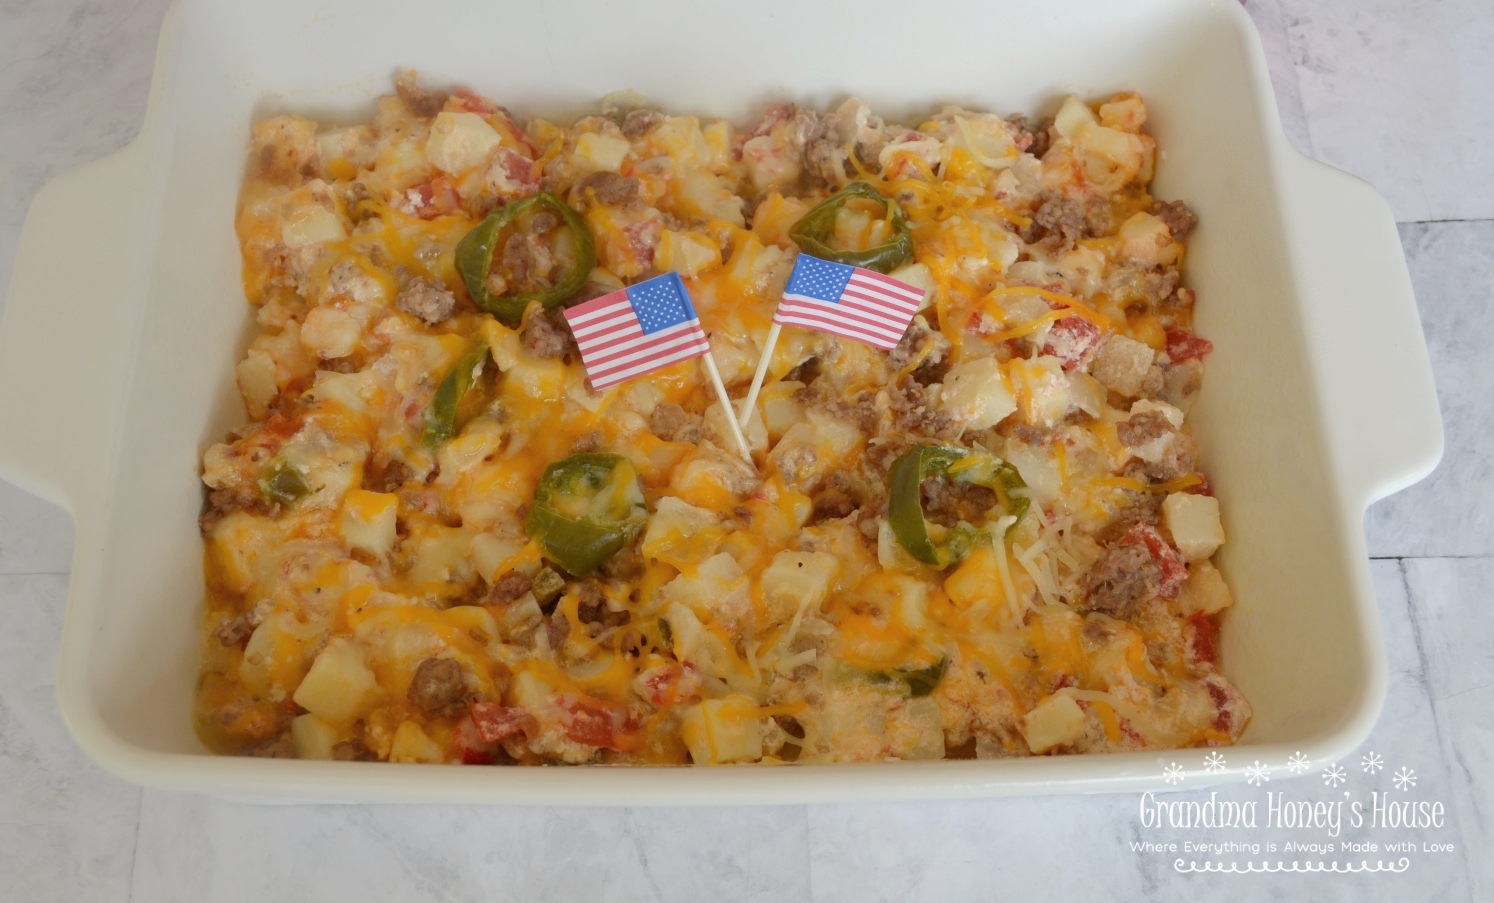 Firecracker Potato Casserole has Frozen Potatoes O Brien,  Rotel,  spicy sausage, sour cream, butter, jalapenos, and lots of cheese. Perfect for BBQ's.